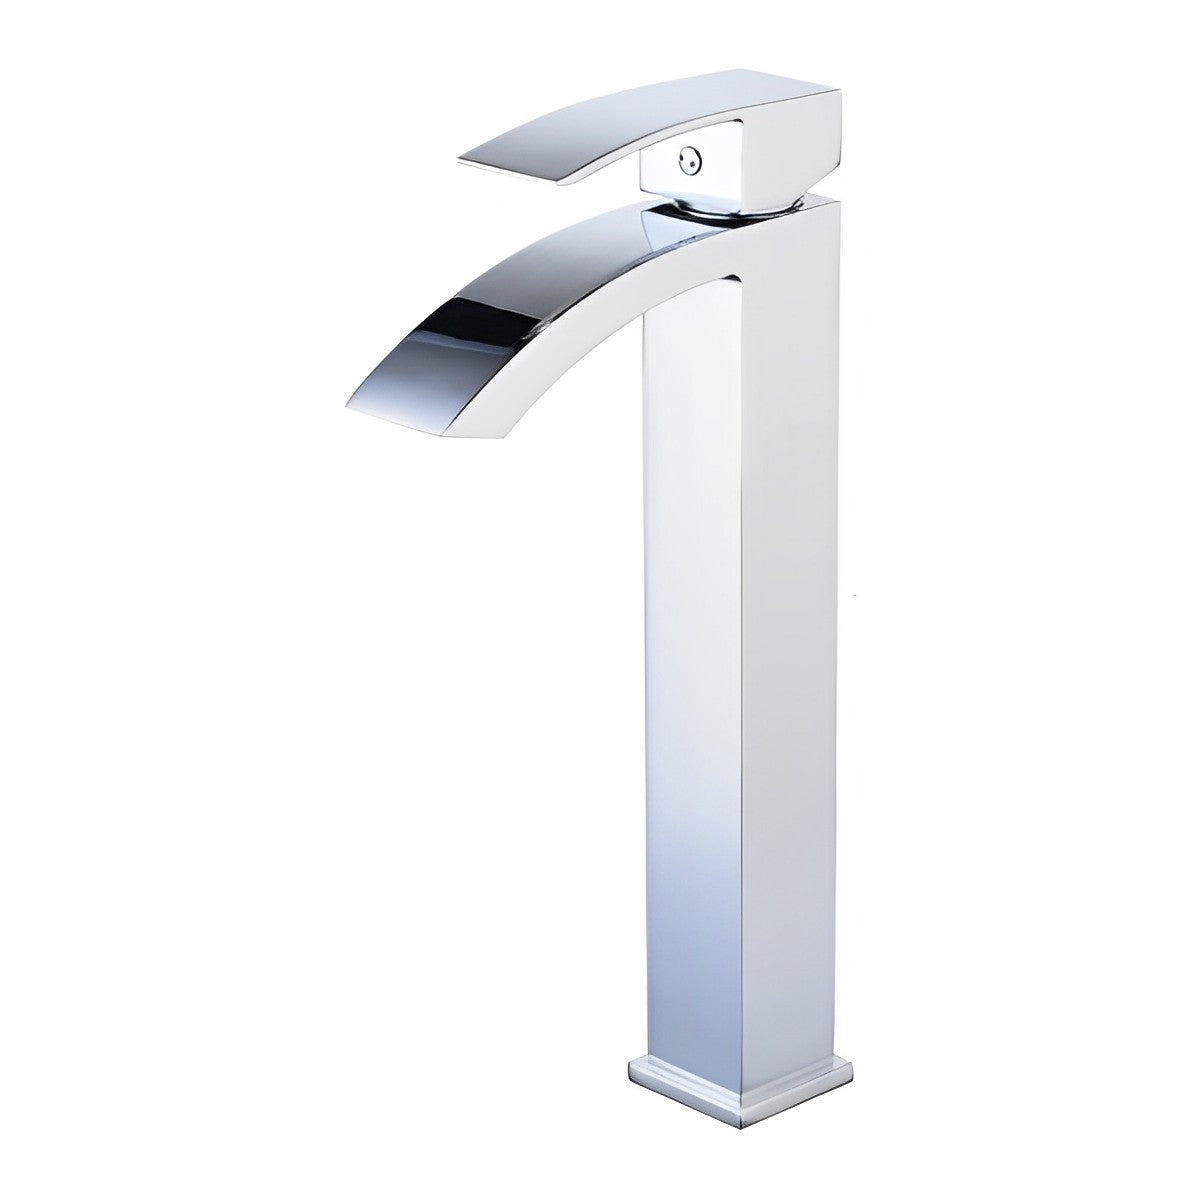 Polished Chrome On Top Sink Faucet HT8020PC - RenoShop